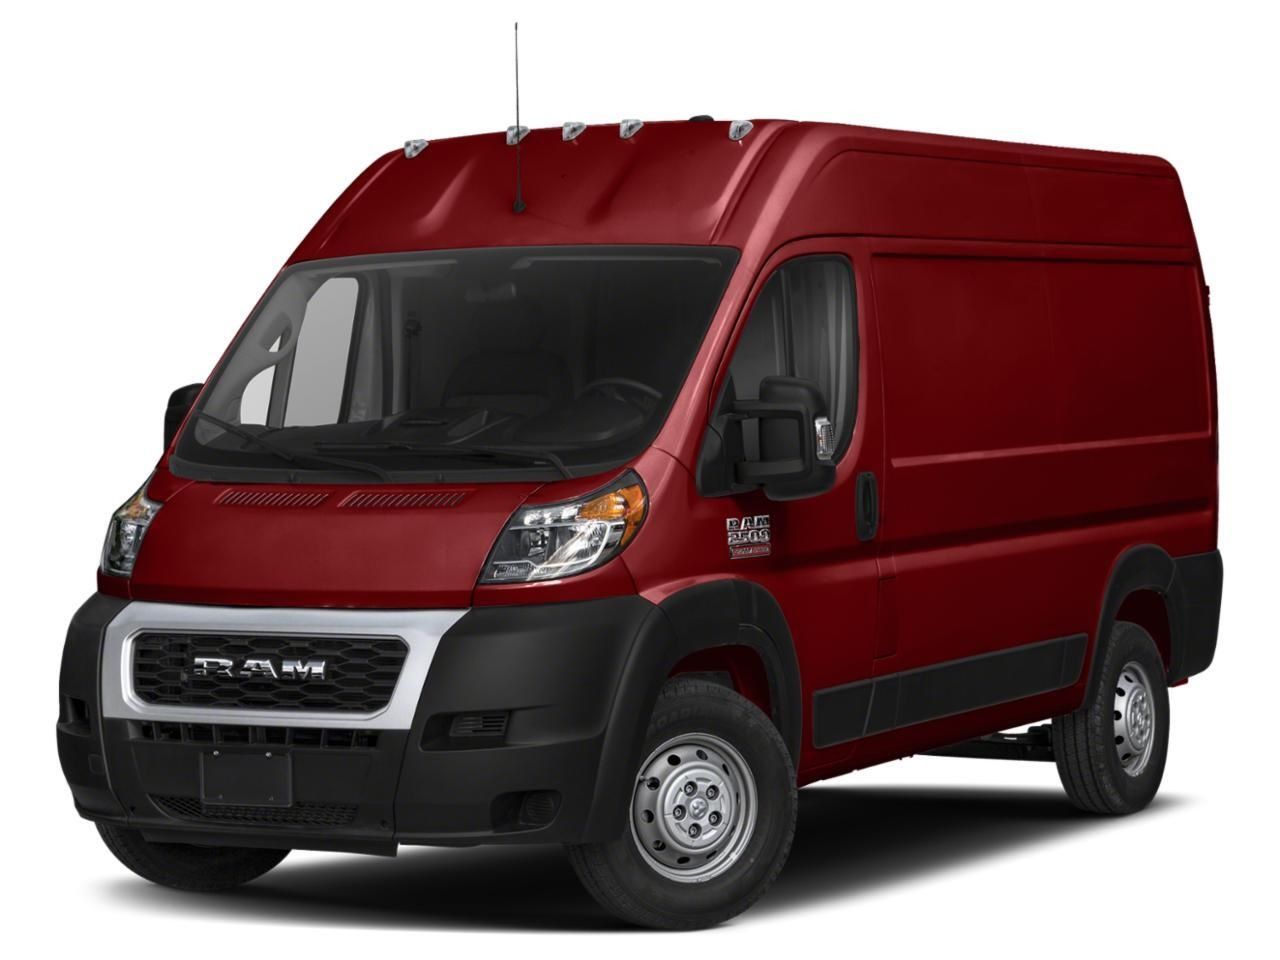 The 2022 Ram Promaster 2500 High Roof: An In-Depth Review for Business Owners and Van Lifers